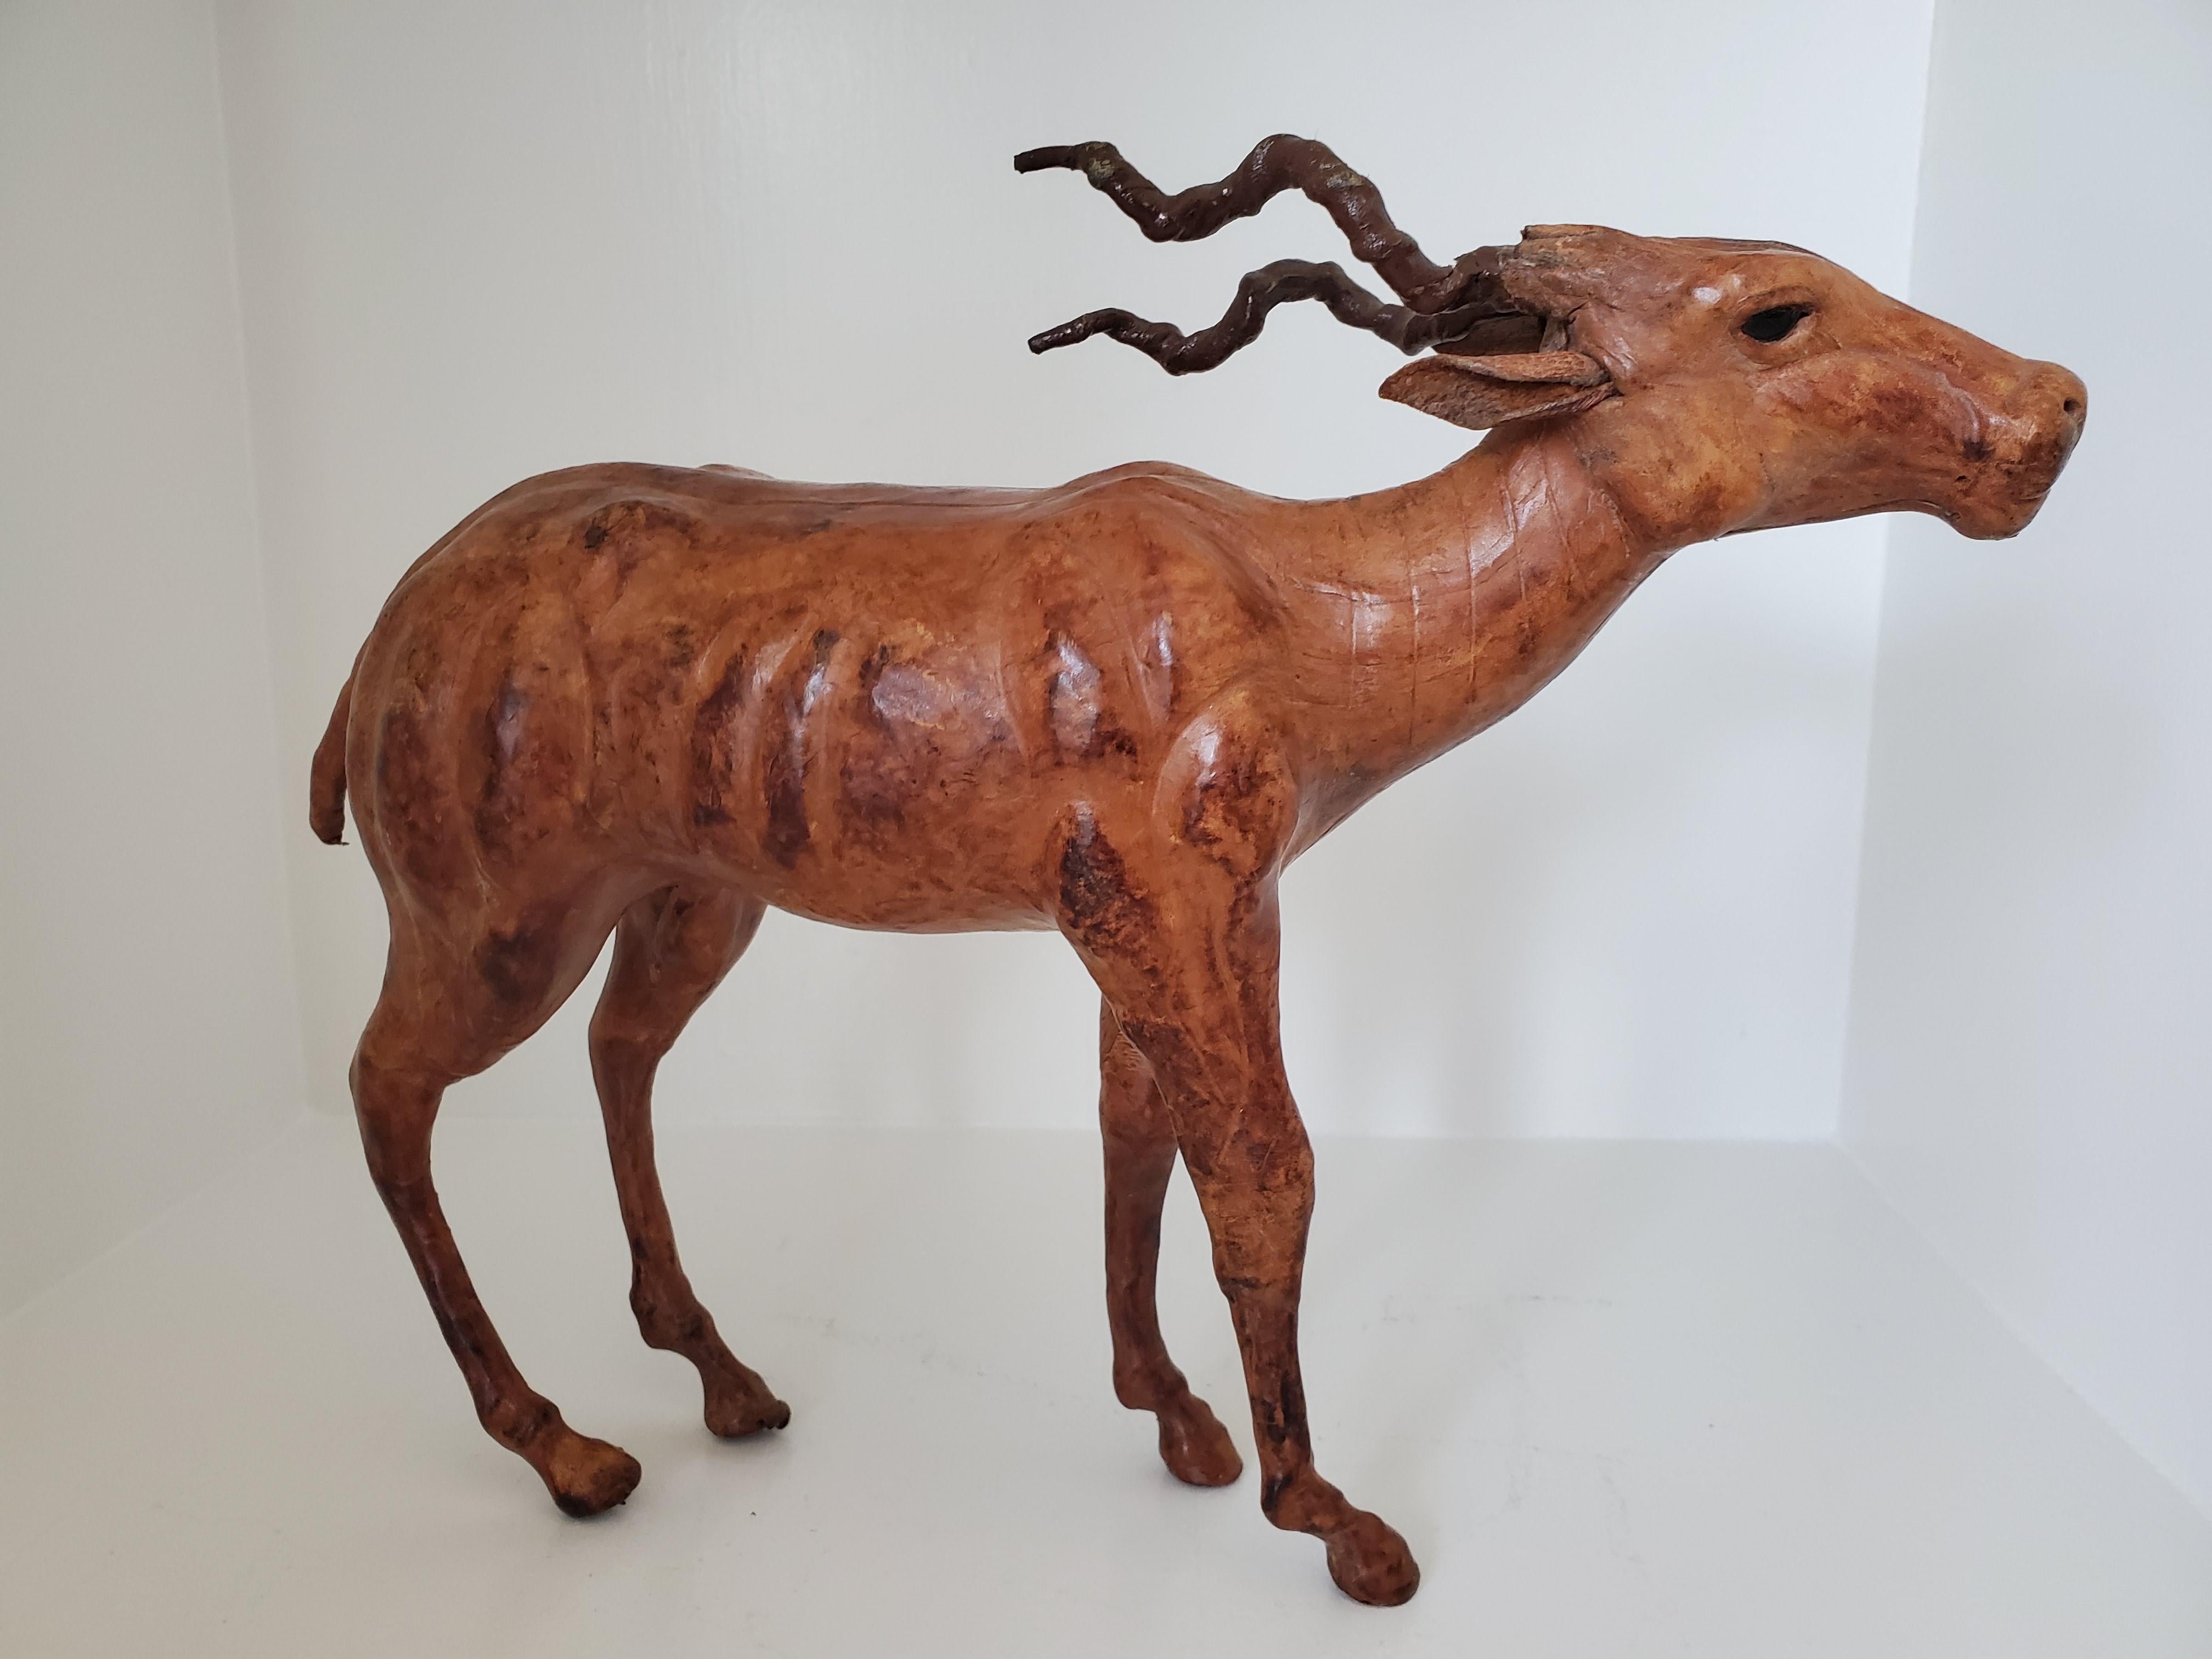 Art Deco Vintage Sculpture - Wood and Leather Gazelle Likely from Liberty's London For Sale